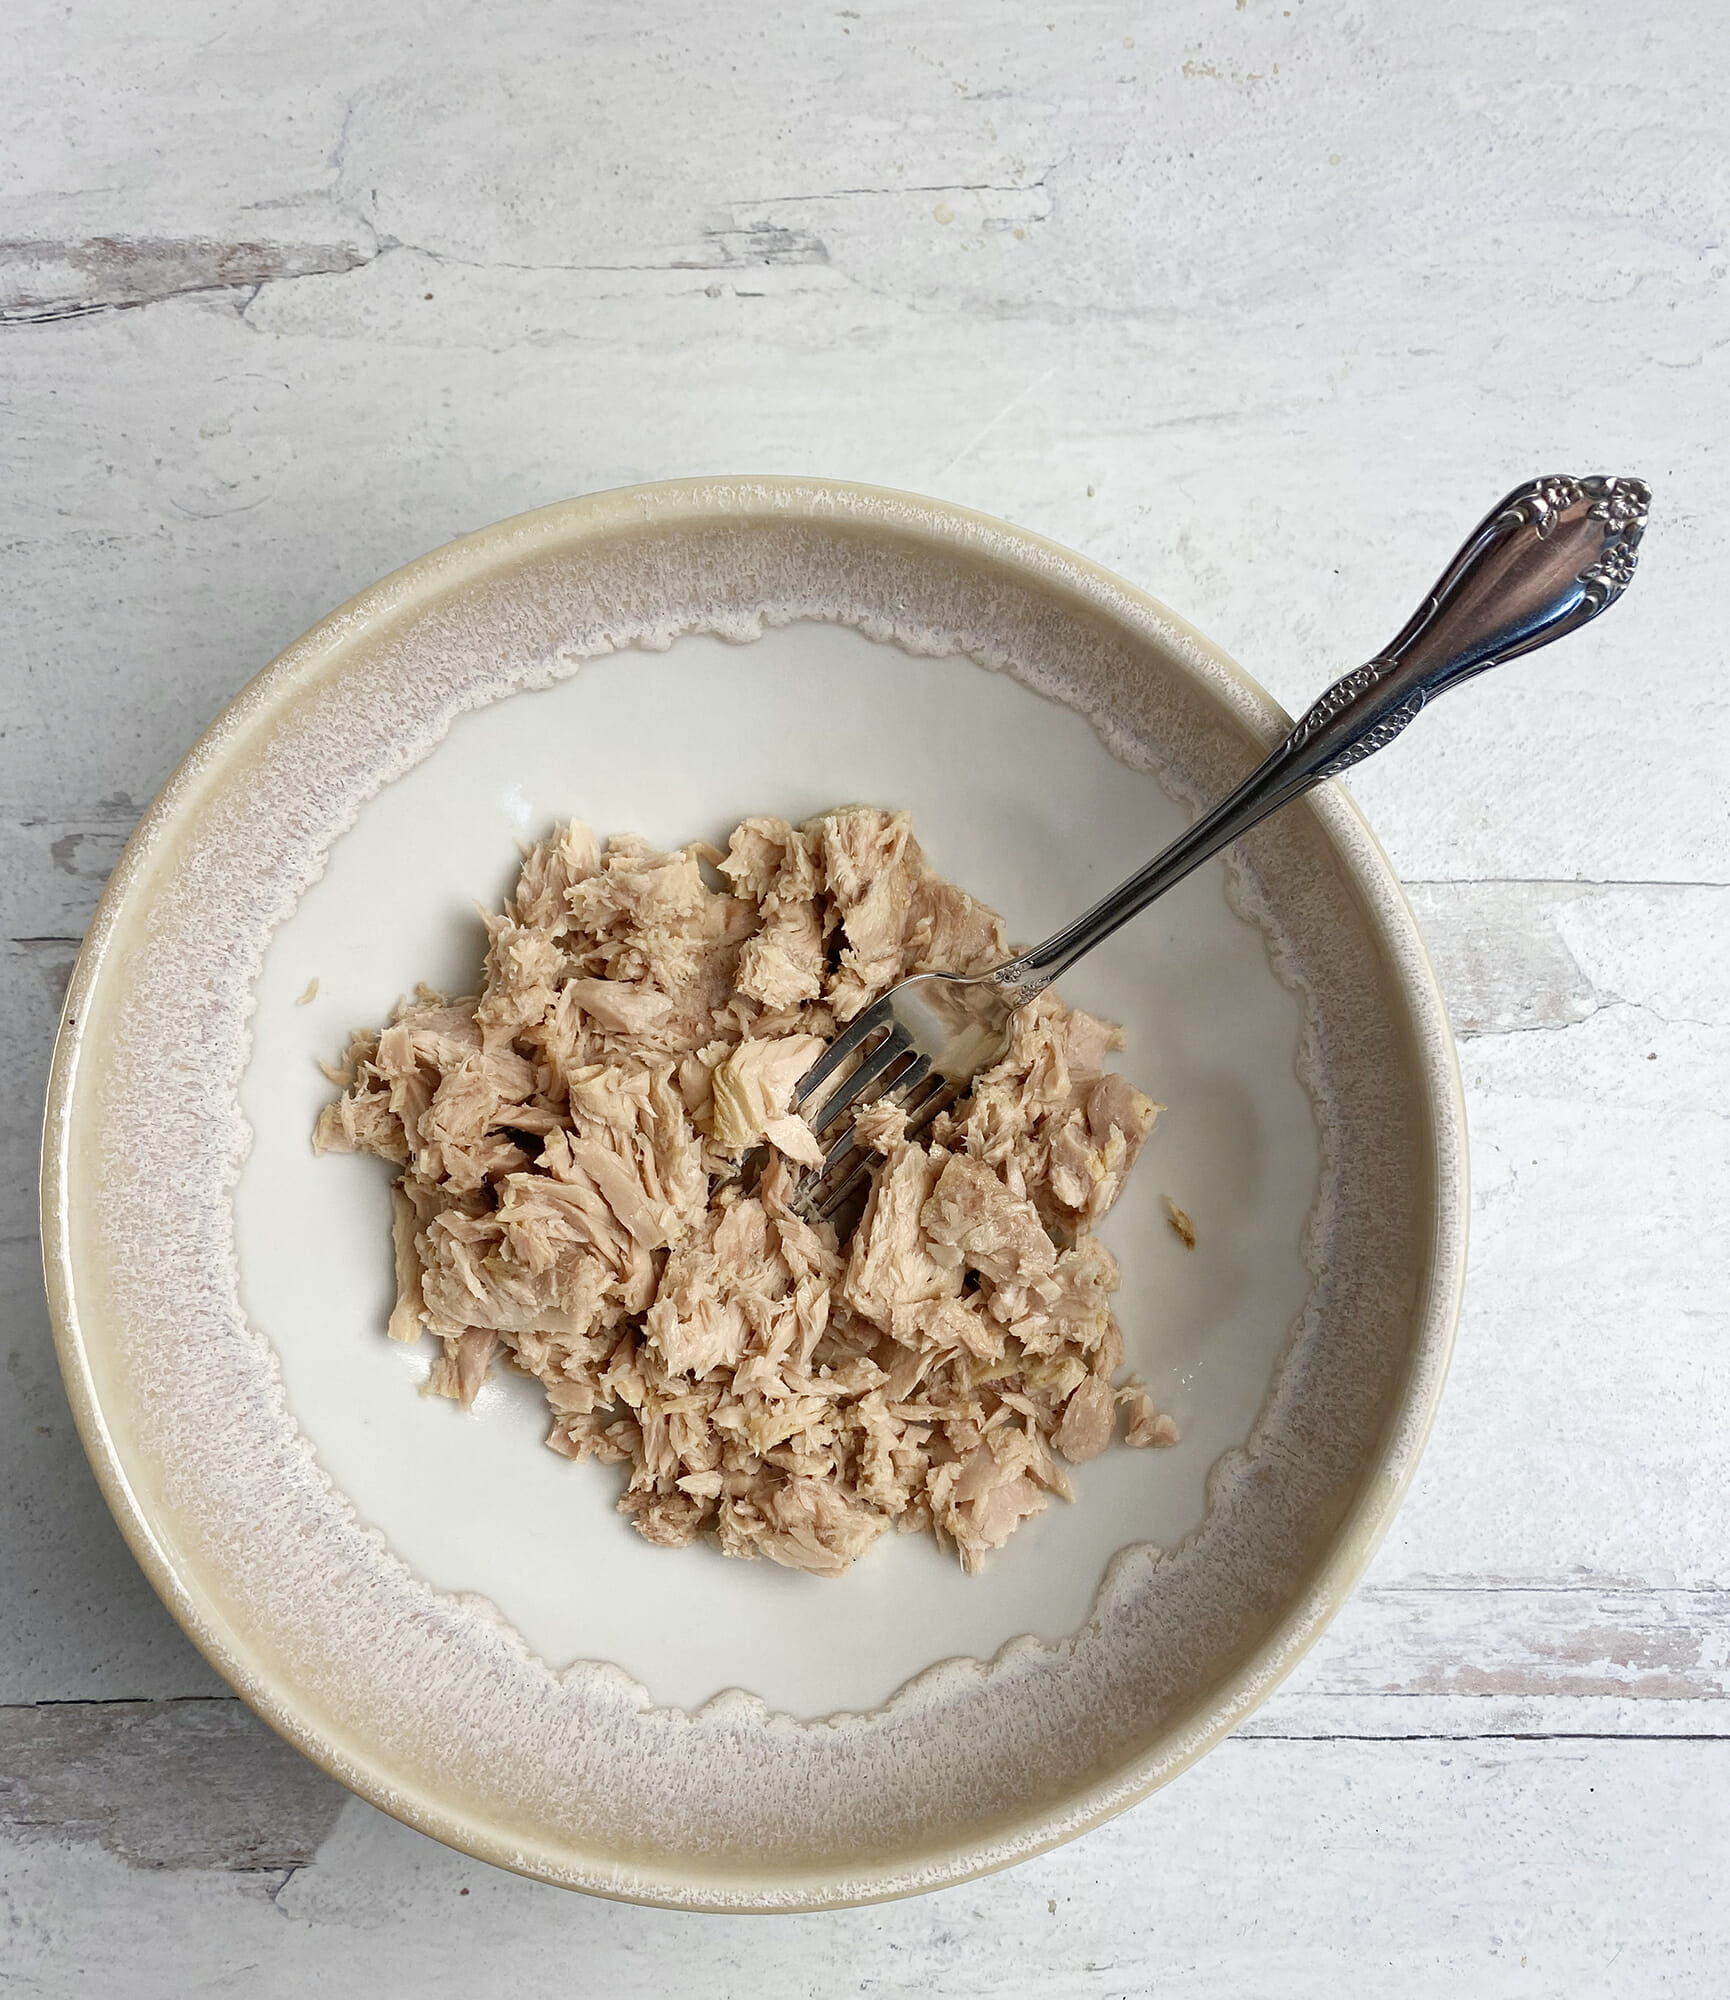 Flaked tuna fish in a bowl with a fork.